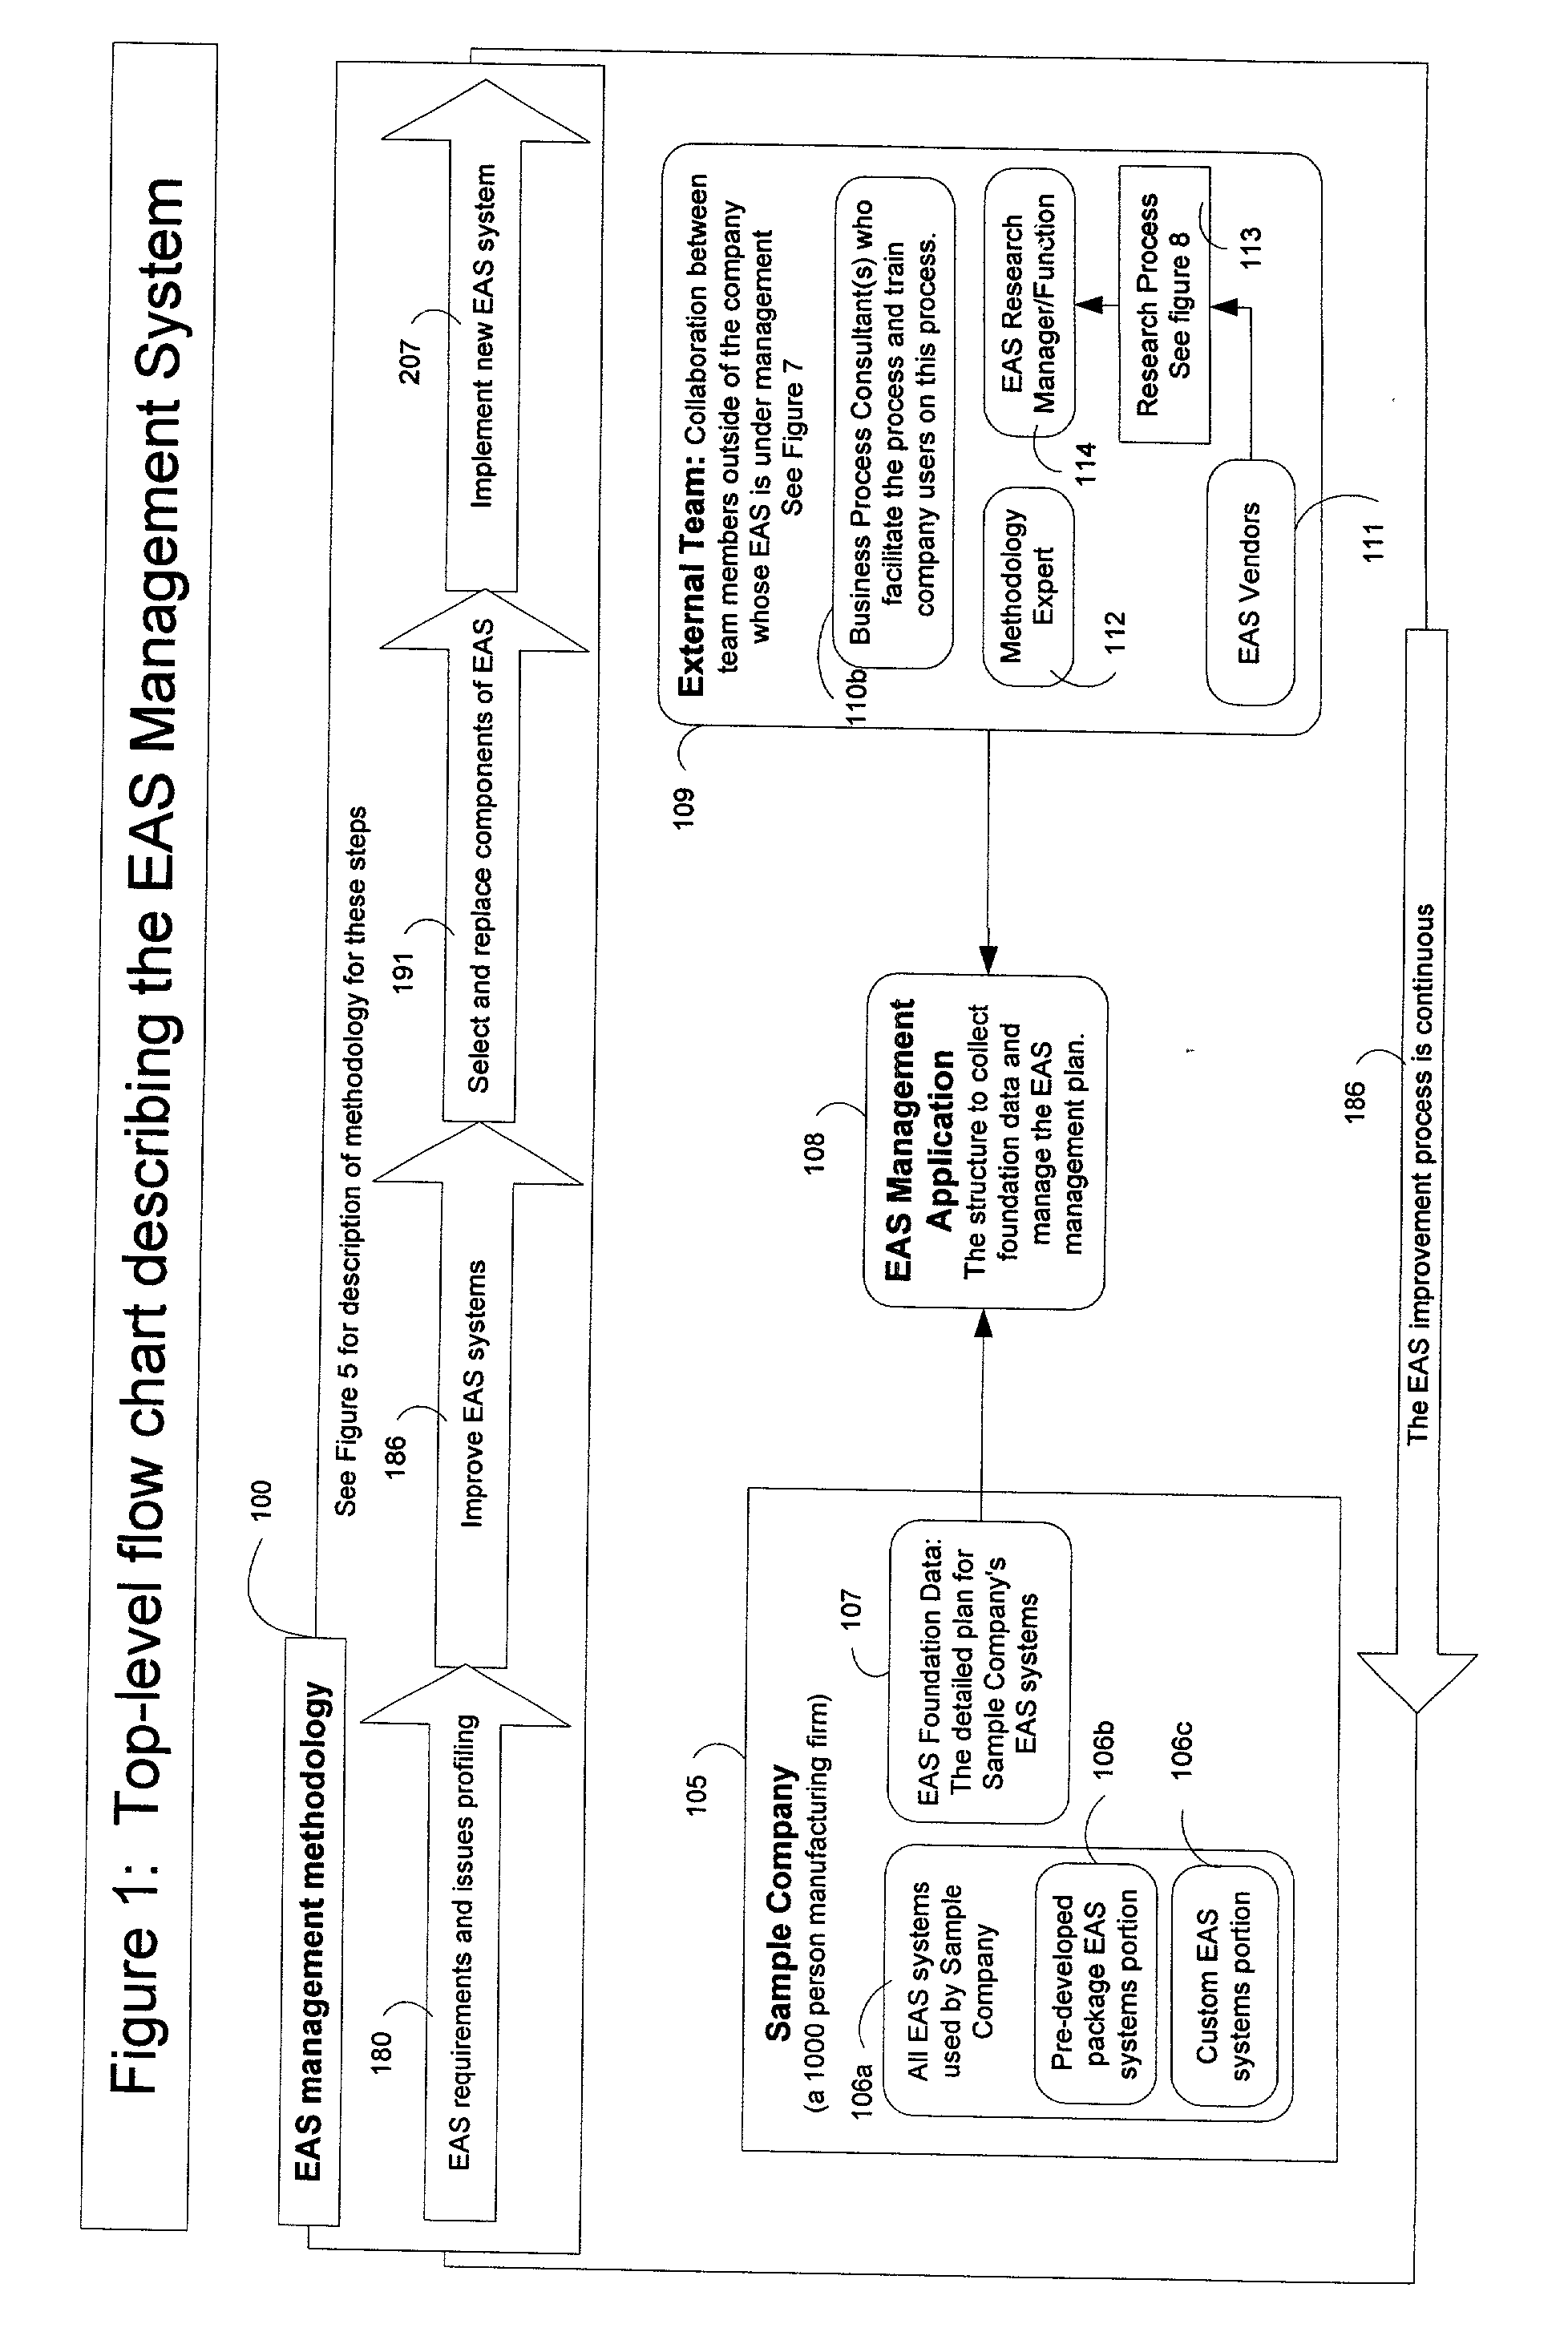 Method and apparatus for an information systems improvement planning and management process